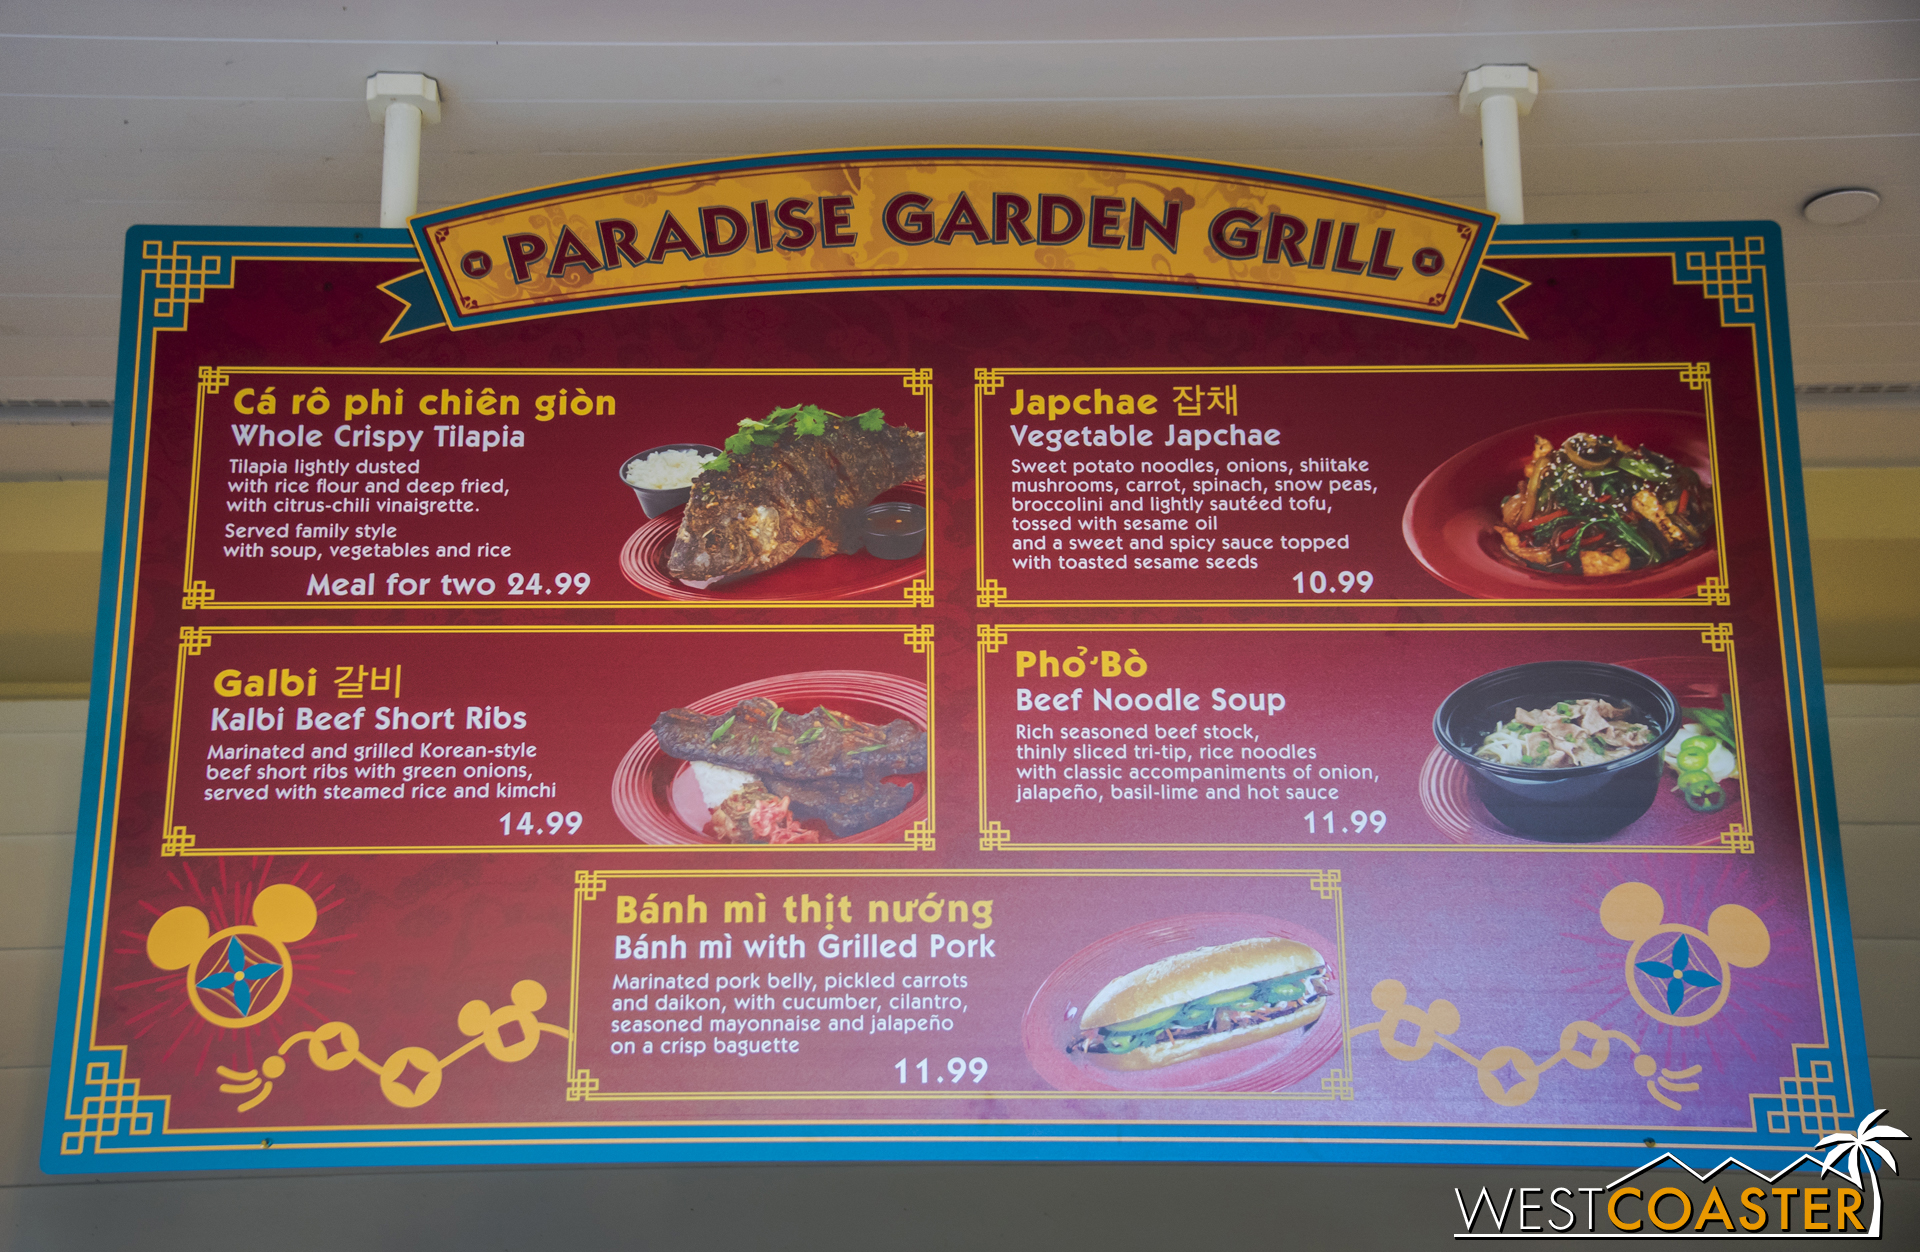  The Paradise Garden Grill has the same seasonal menu as last year too, plus a bánh mì.&nbsp; From last year's tastings, I wouldn't necessarily recommend the Japchae or Pho, to be honest.&nbsp; The Galbi was delicious, though! 